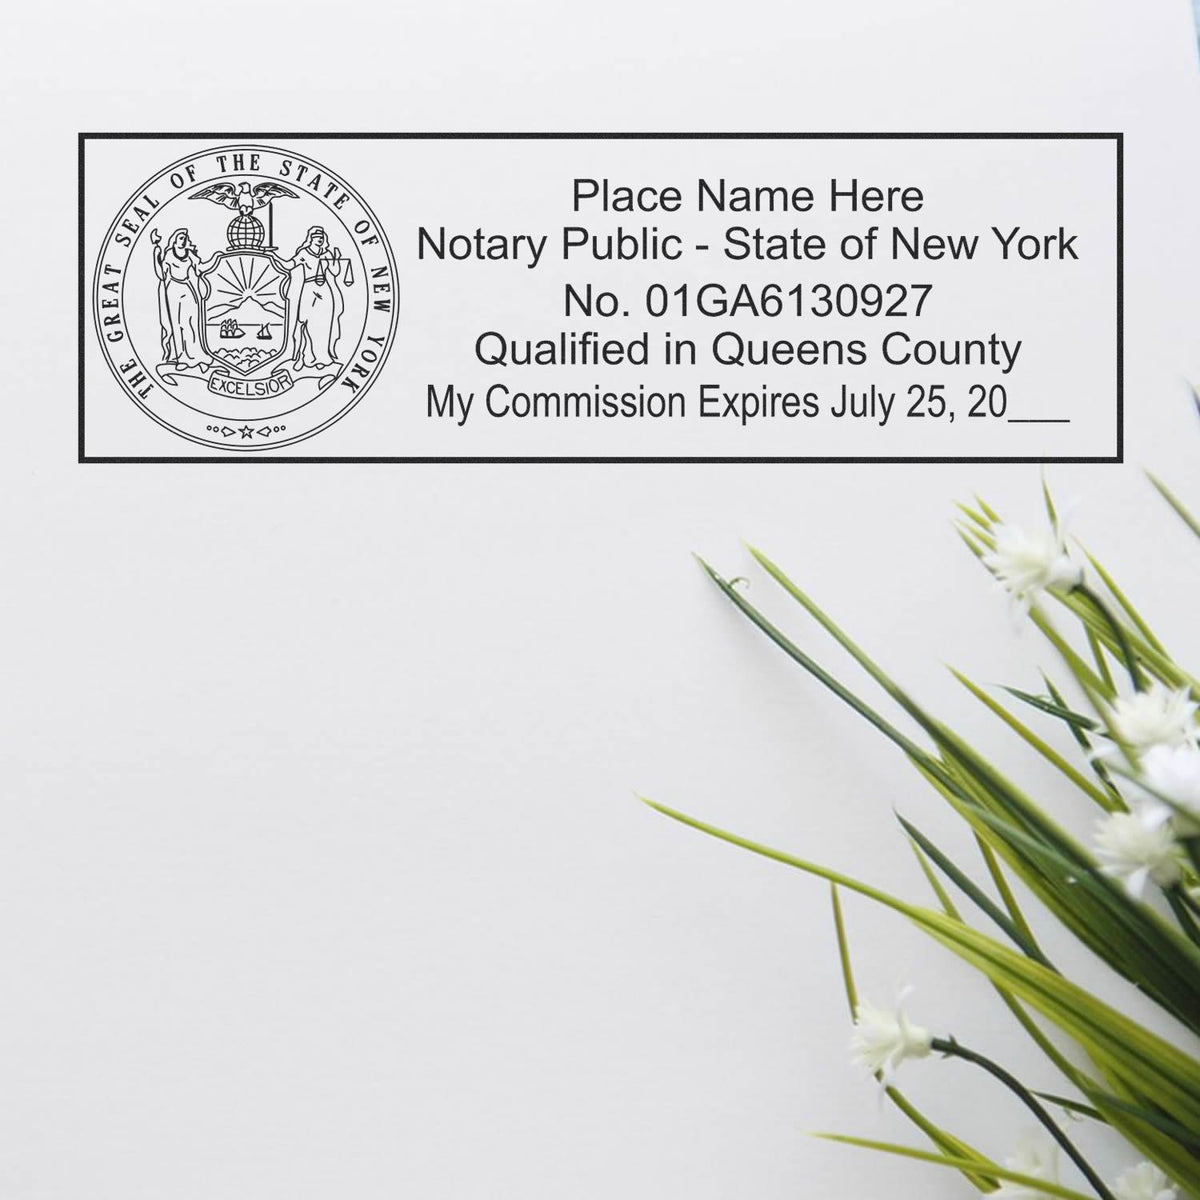 A lifestyle photo showing a stamped image of the Heavy-Duty New York Rectangular Notary Stamp on a piece of paper